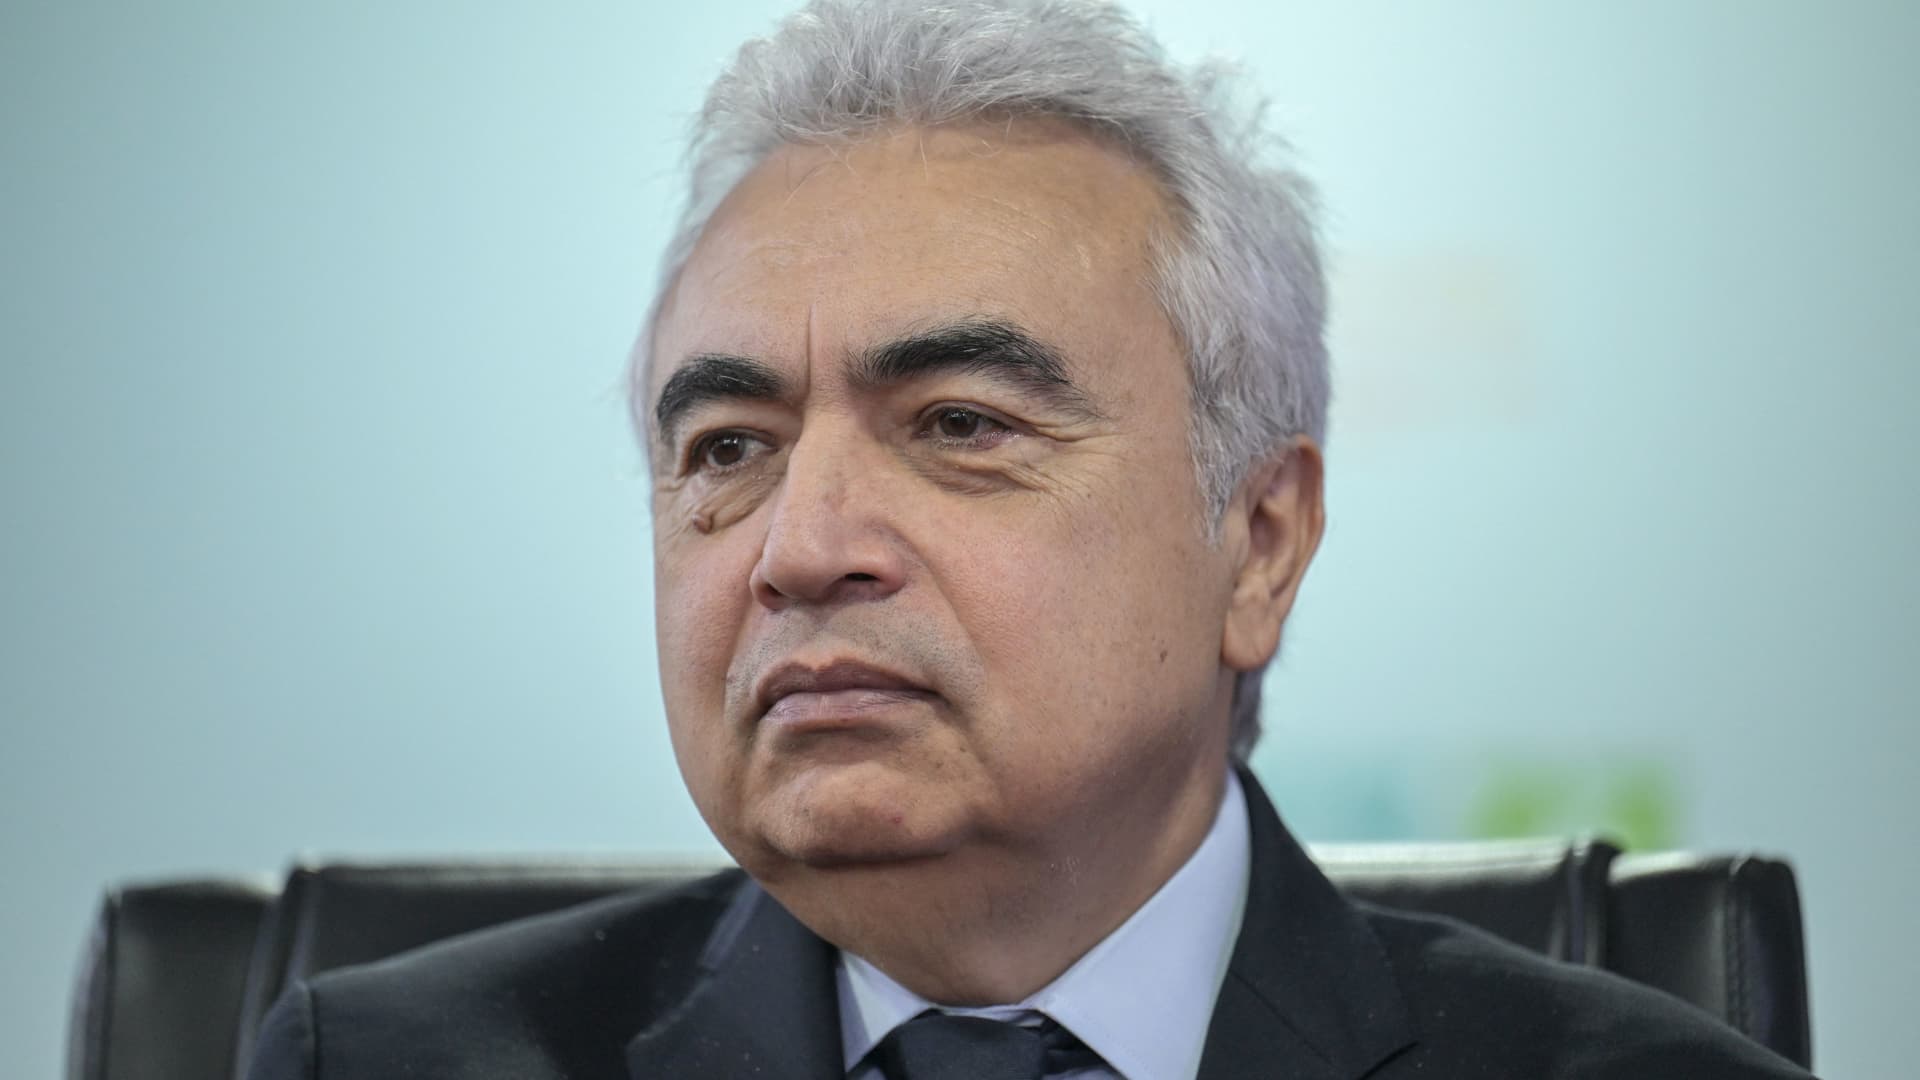 Demand for oil, gas and coal will peak by 2030, but that's not fast enough to keep global warming within 1.5 degrees, says IEA chief